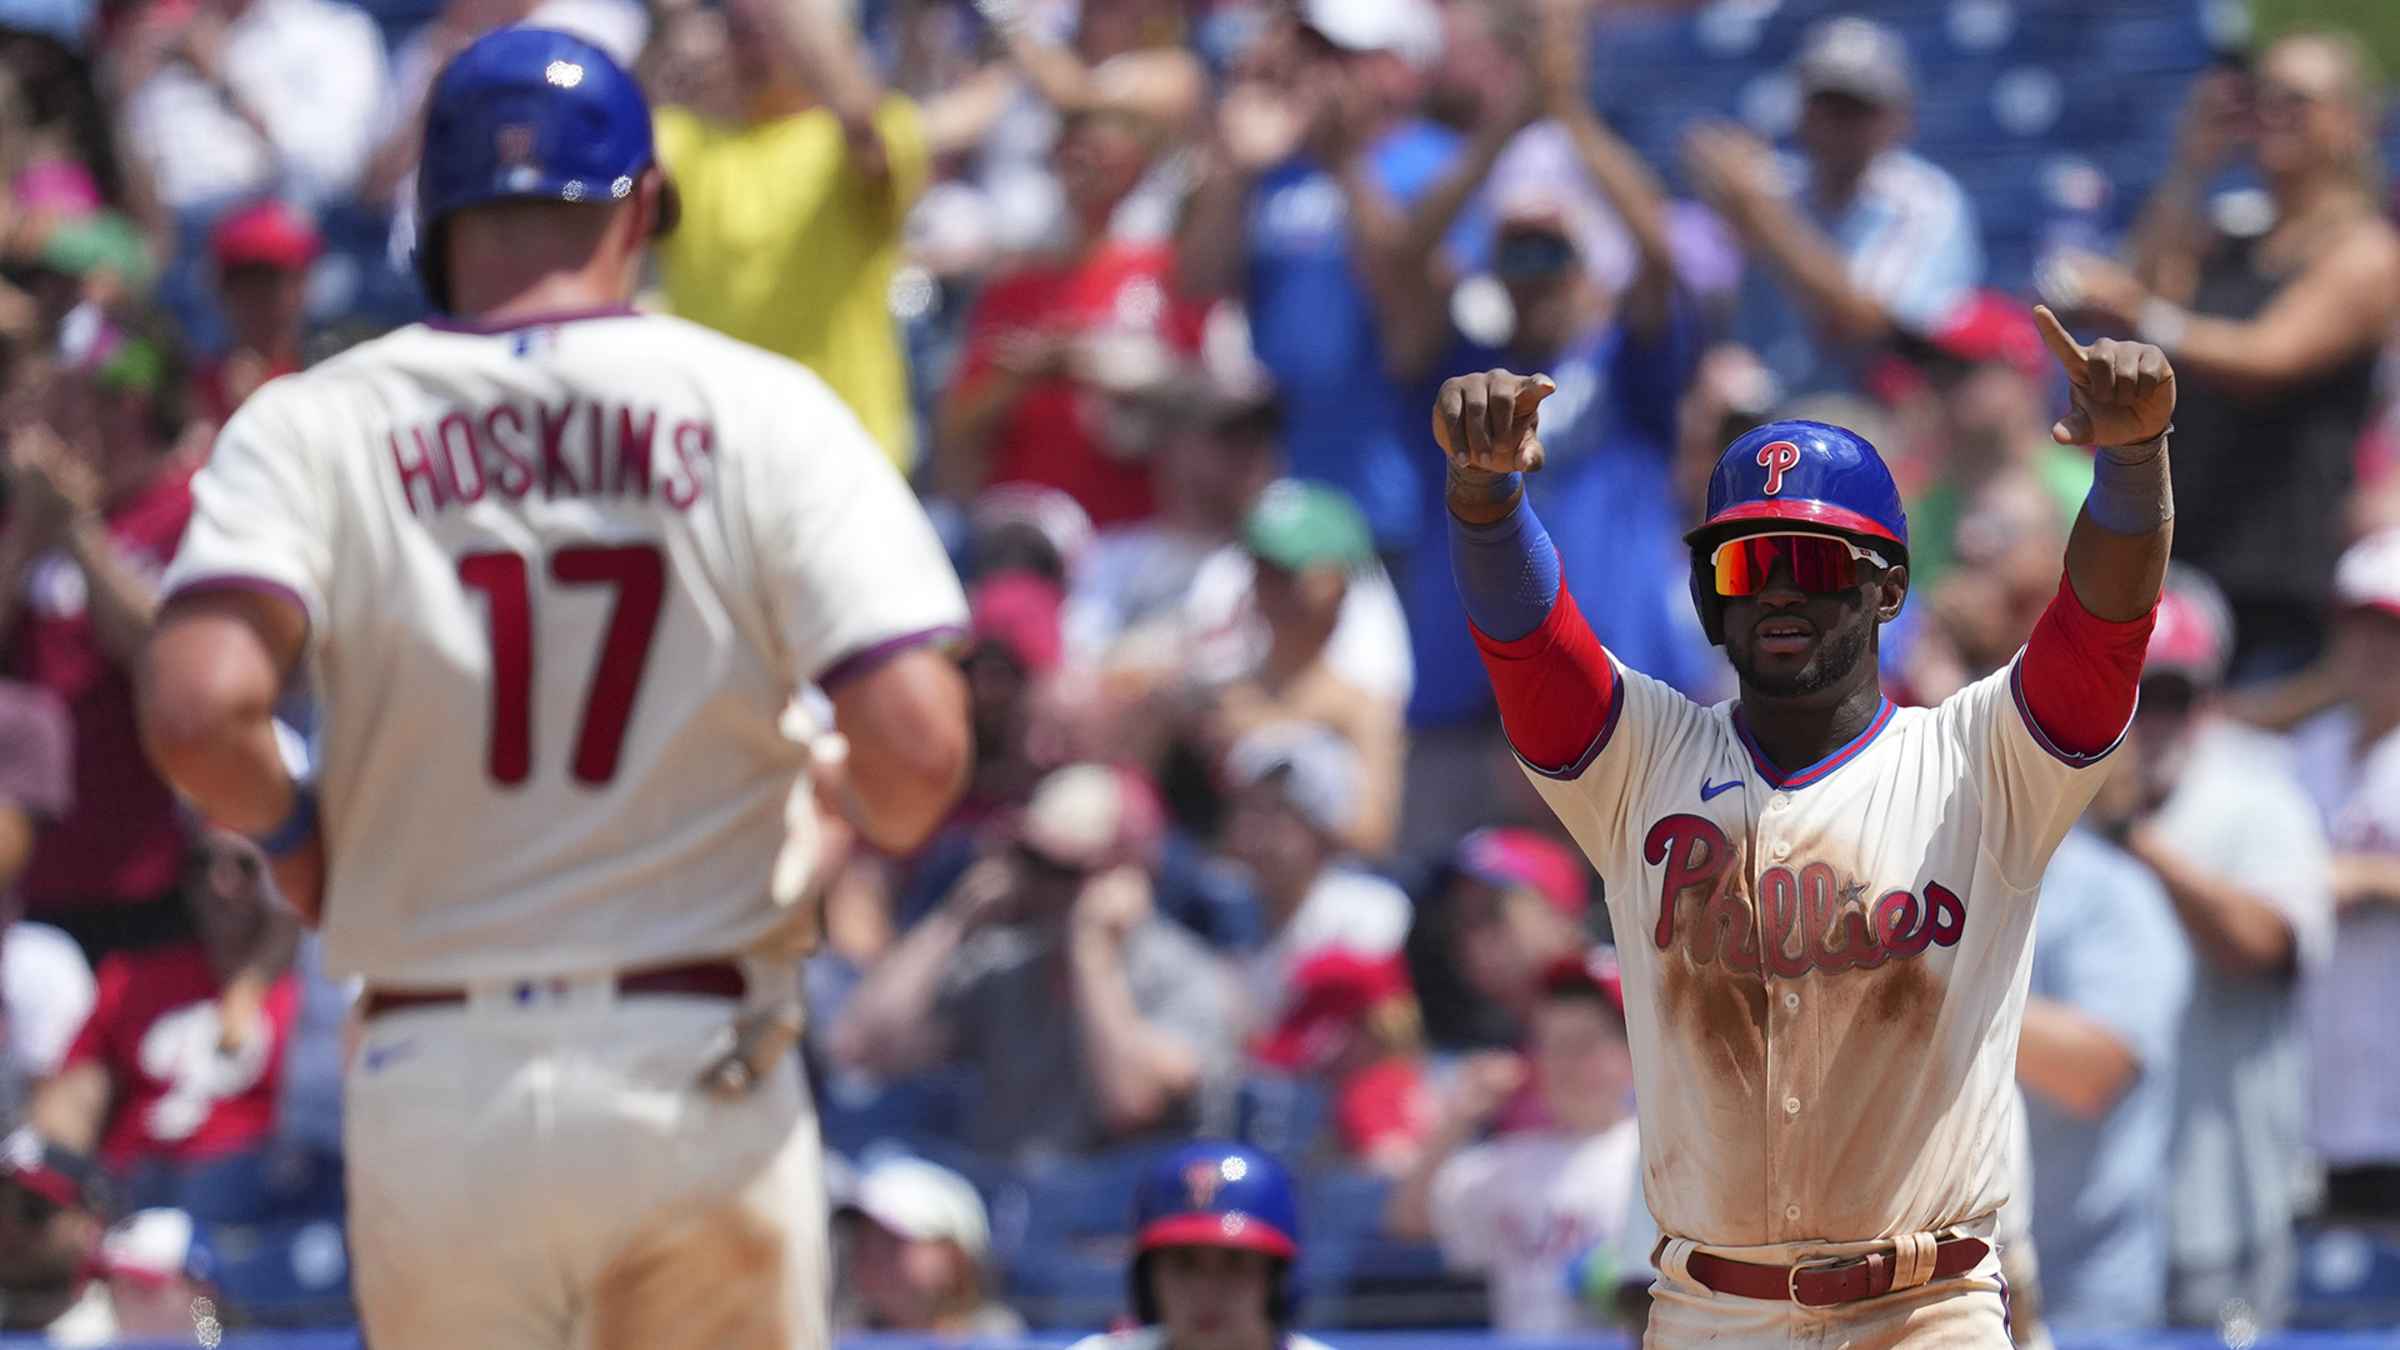 Bohm helps Phils beat Braves 7-2, take 2 of 3 from Atlanta - The